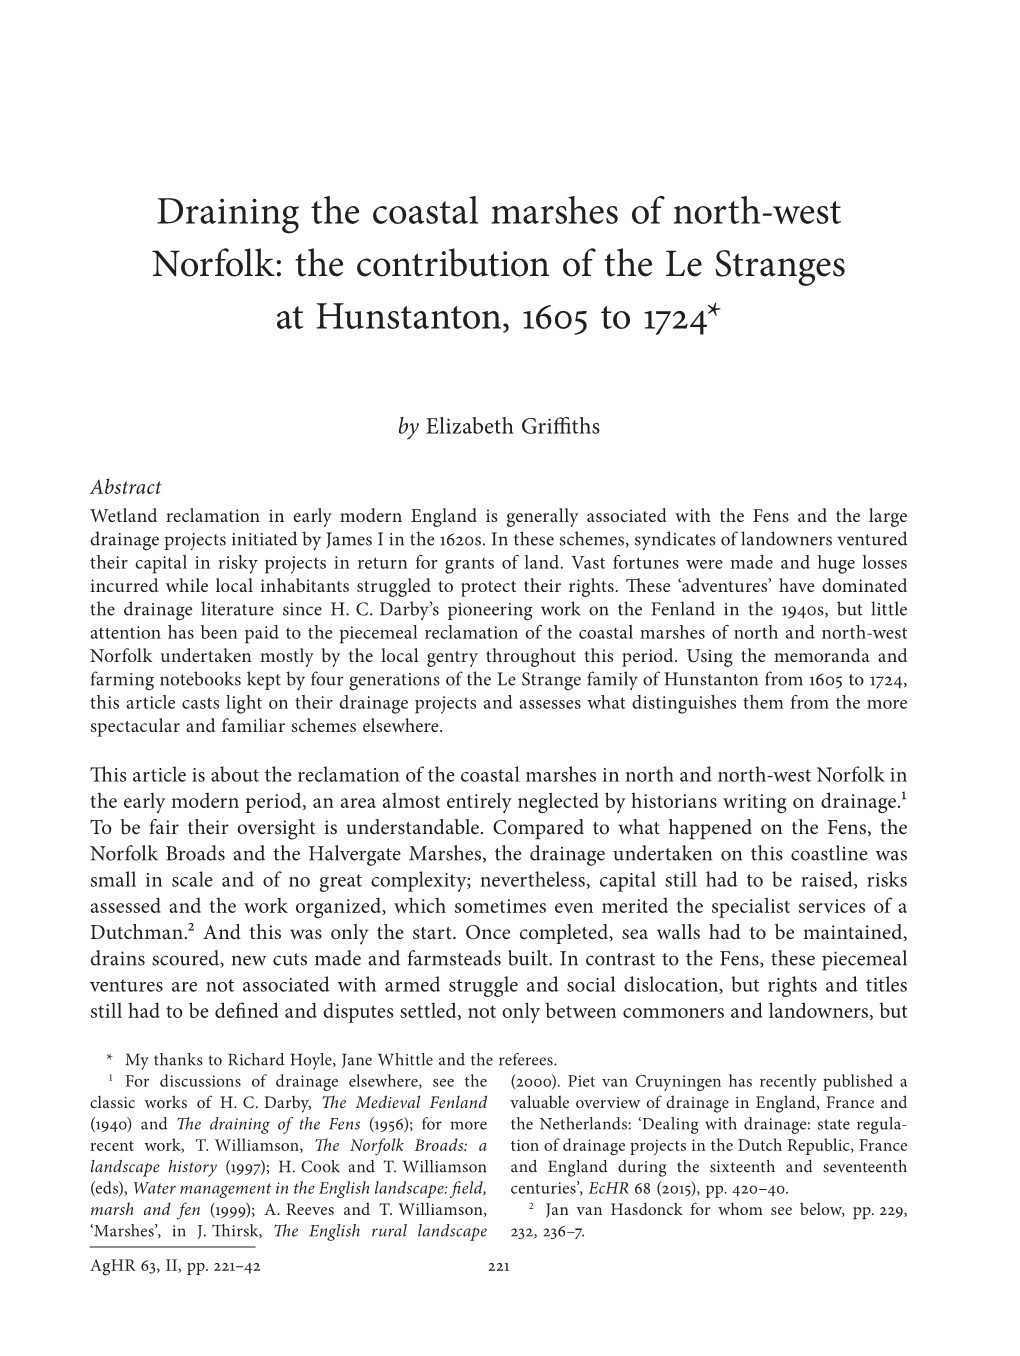 Draining the Coastal Marshes of North-West Norfolk: the Contribution of the Le Stranges at Hunstanton, 1605 to 1724*